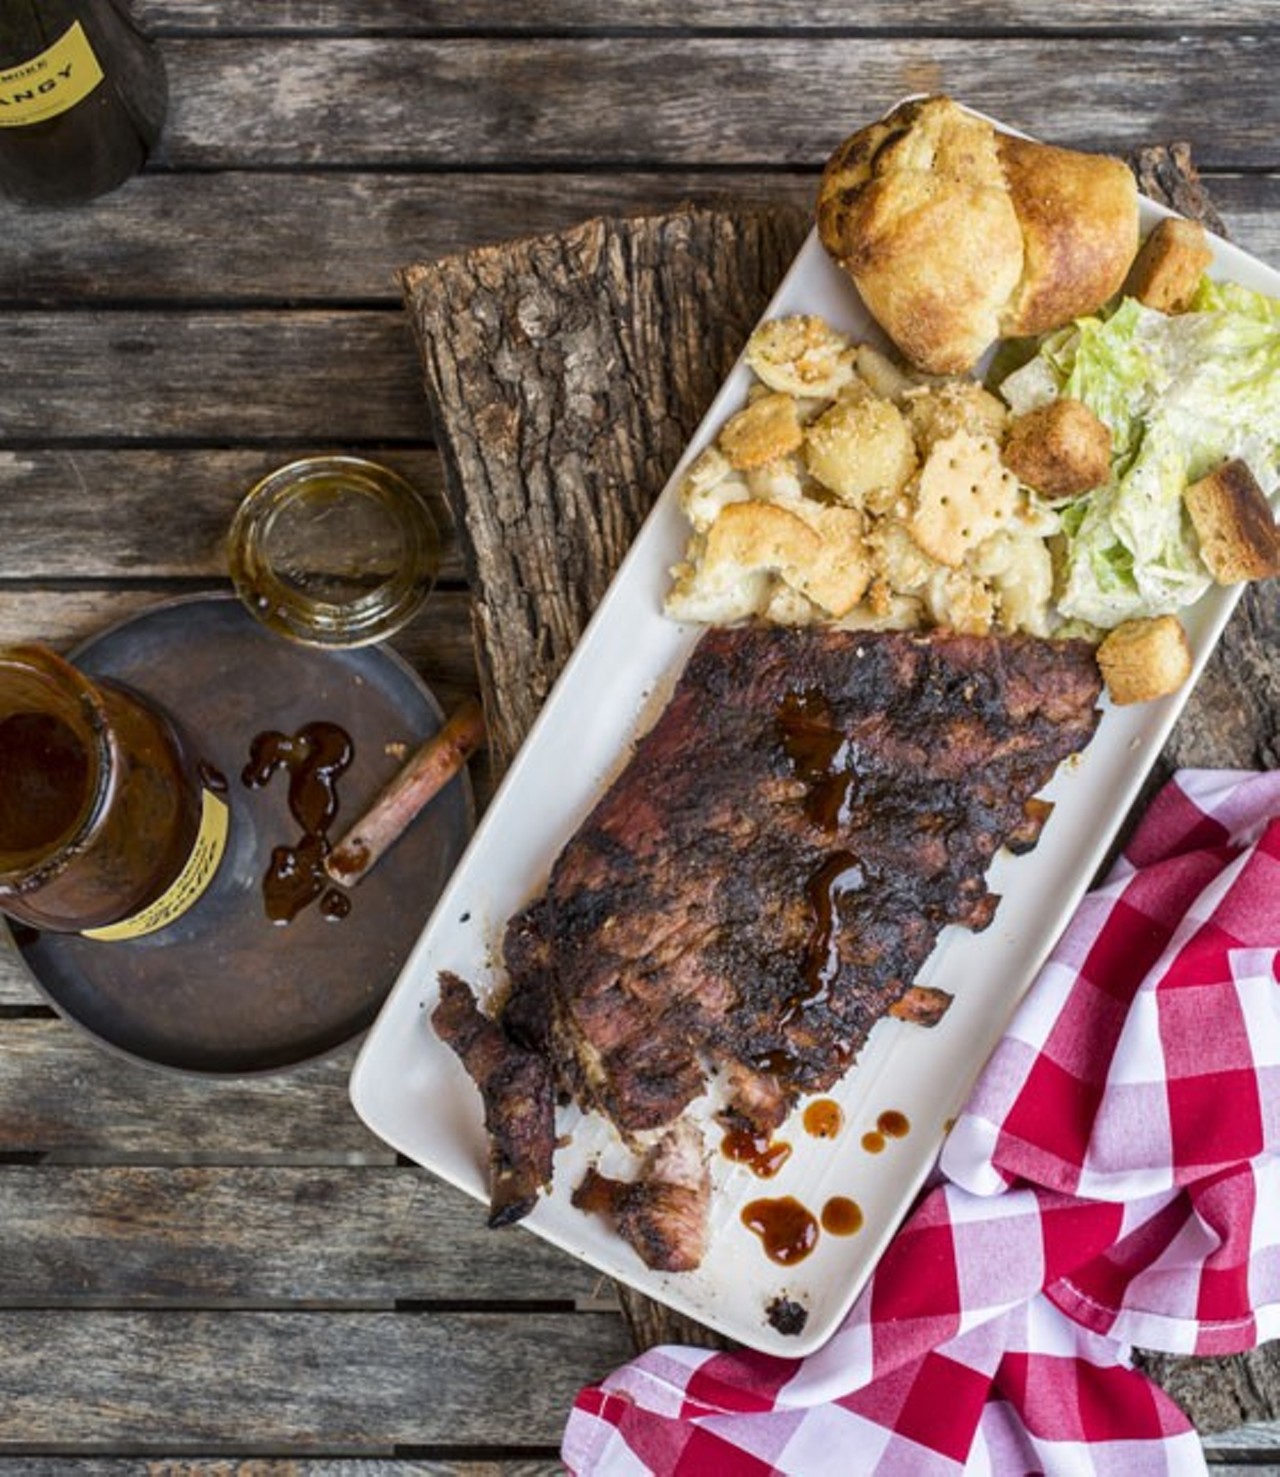 Get sauced up to your elbows.
Your St. Louis barbecue bucket list should include, but definitely not be limited to, Pappy&#146;s, Salt + Smoke, BEAST Craft BBQ Co. and Big Baby Q.
Photo courtesy of Jennifer Silverberg / Riverfront Times